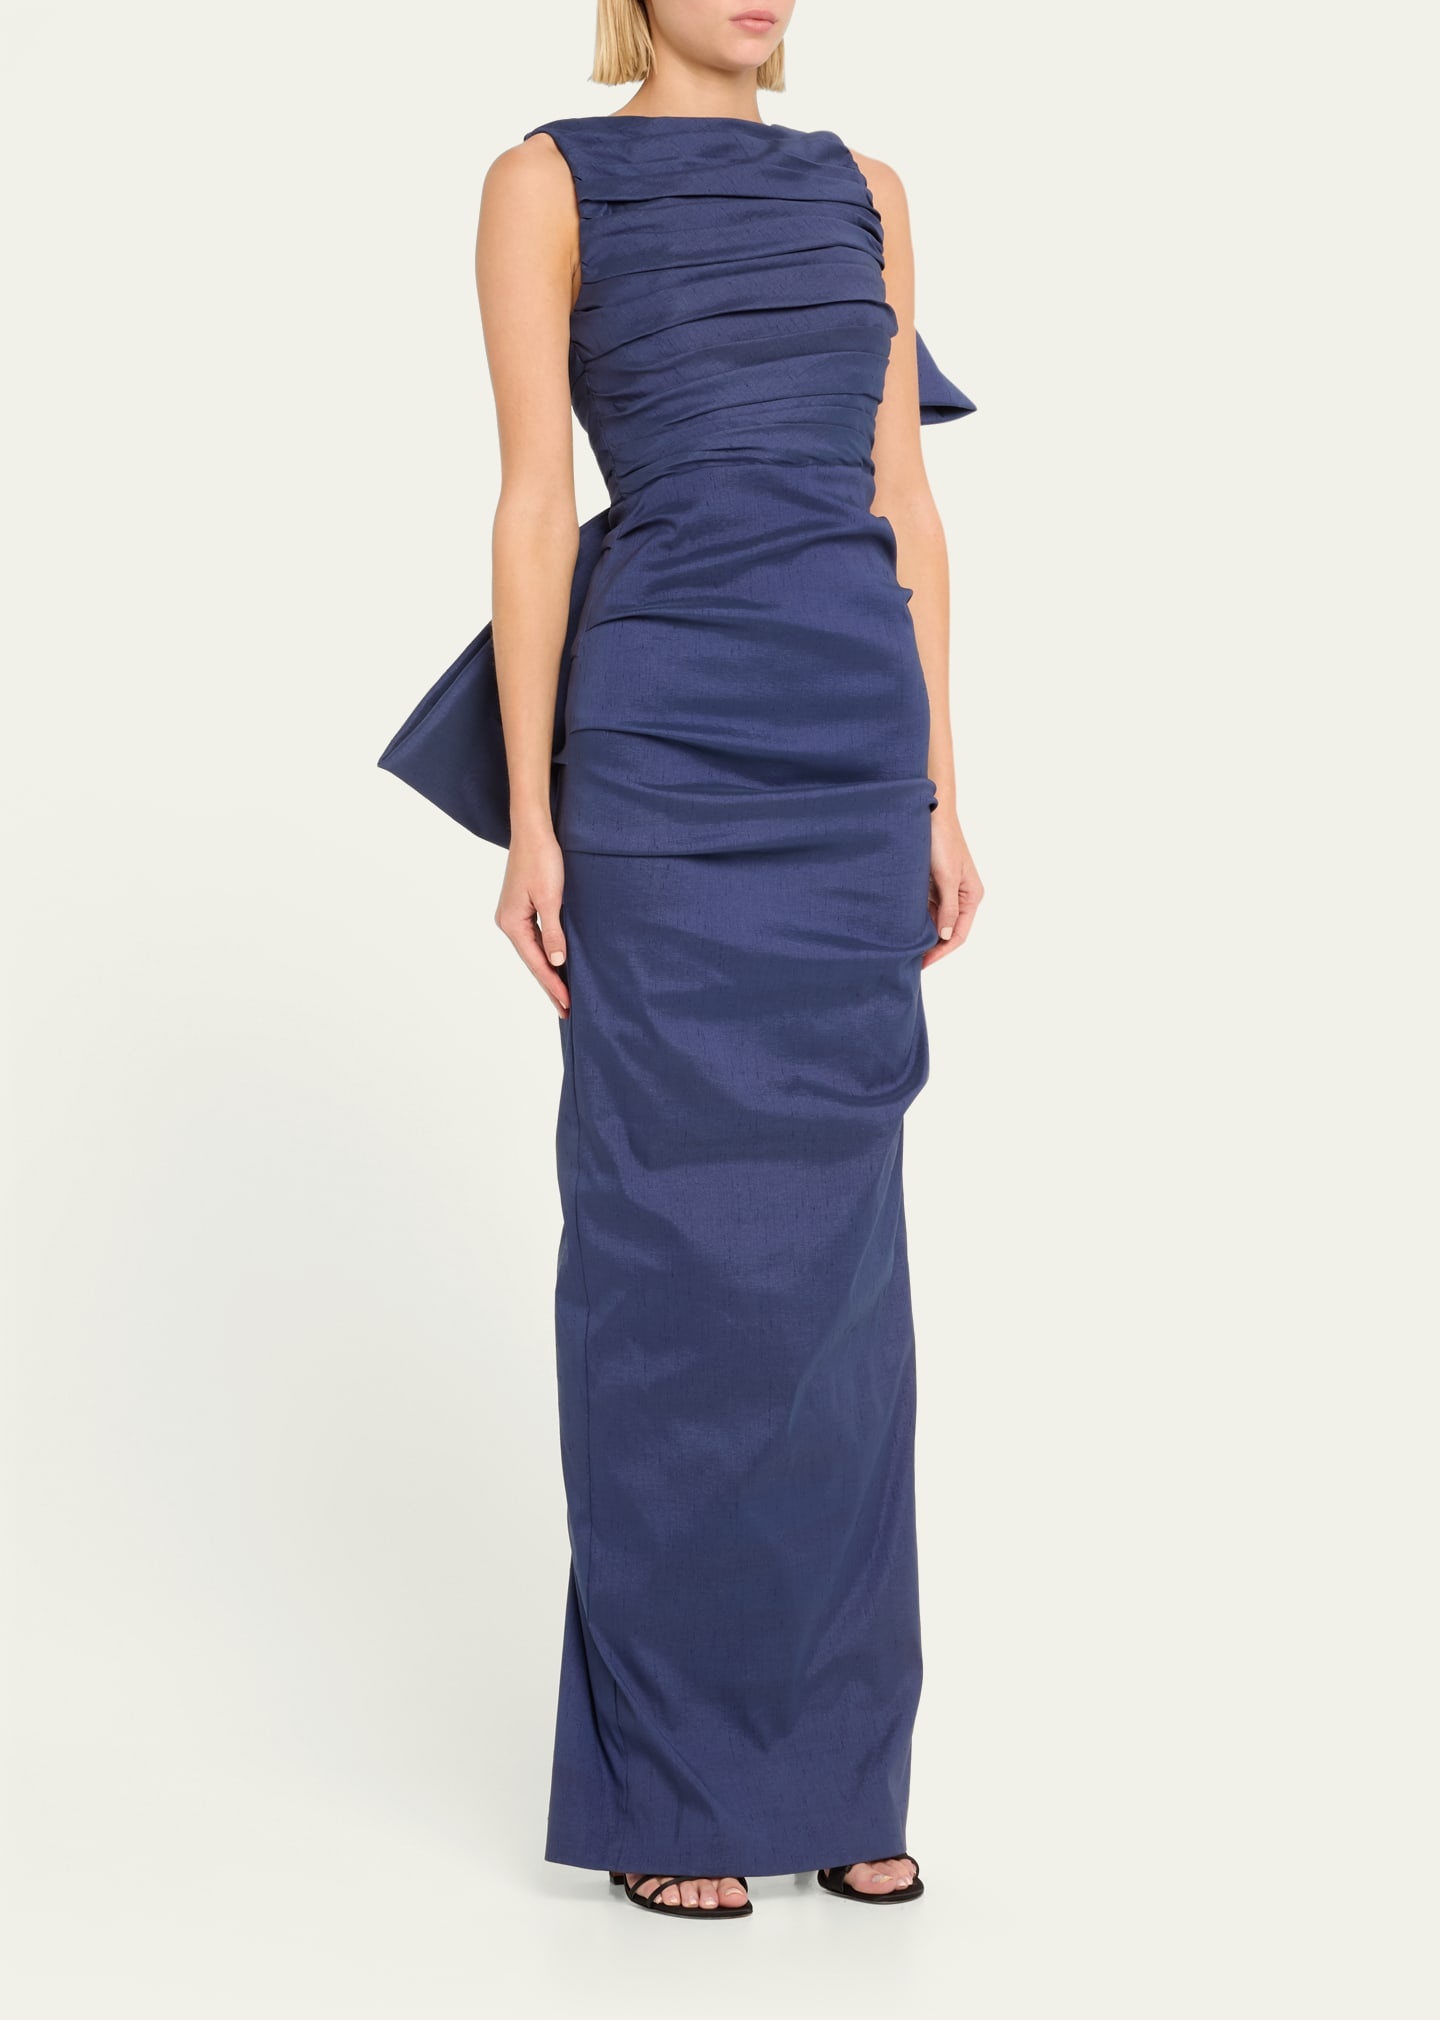 Zora Ruched Taffeta Gown with Back Bow - 4